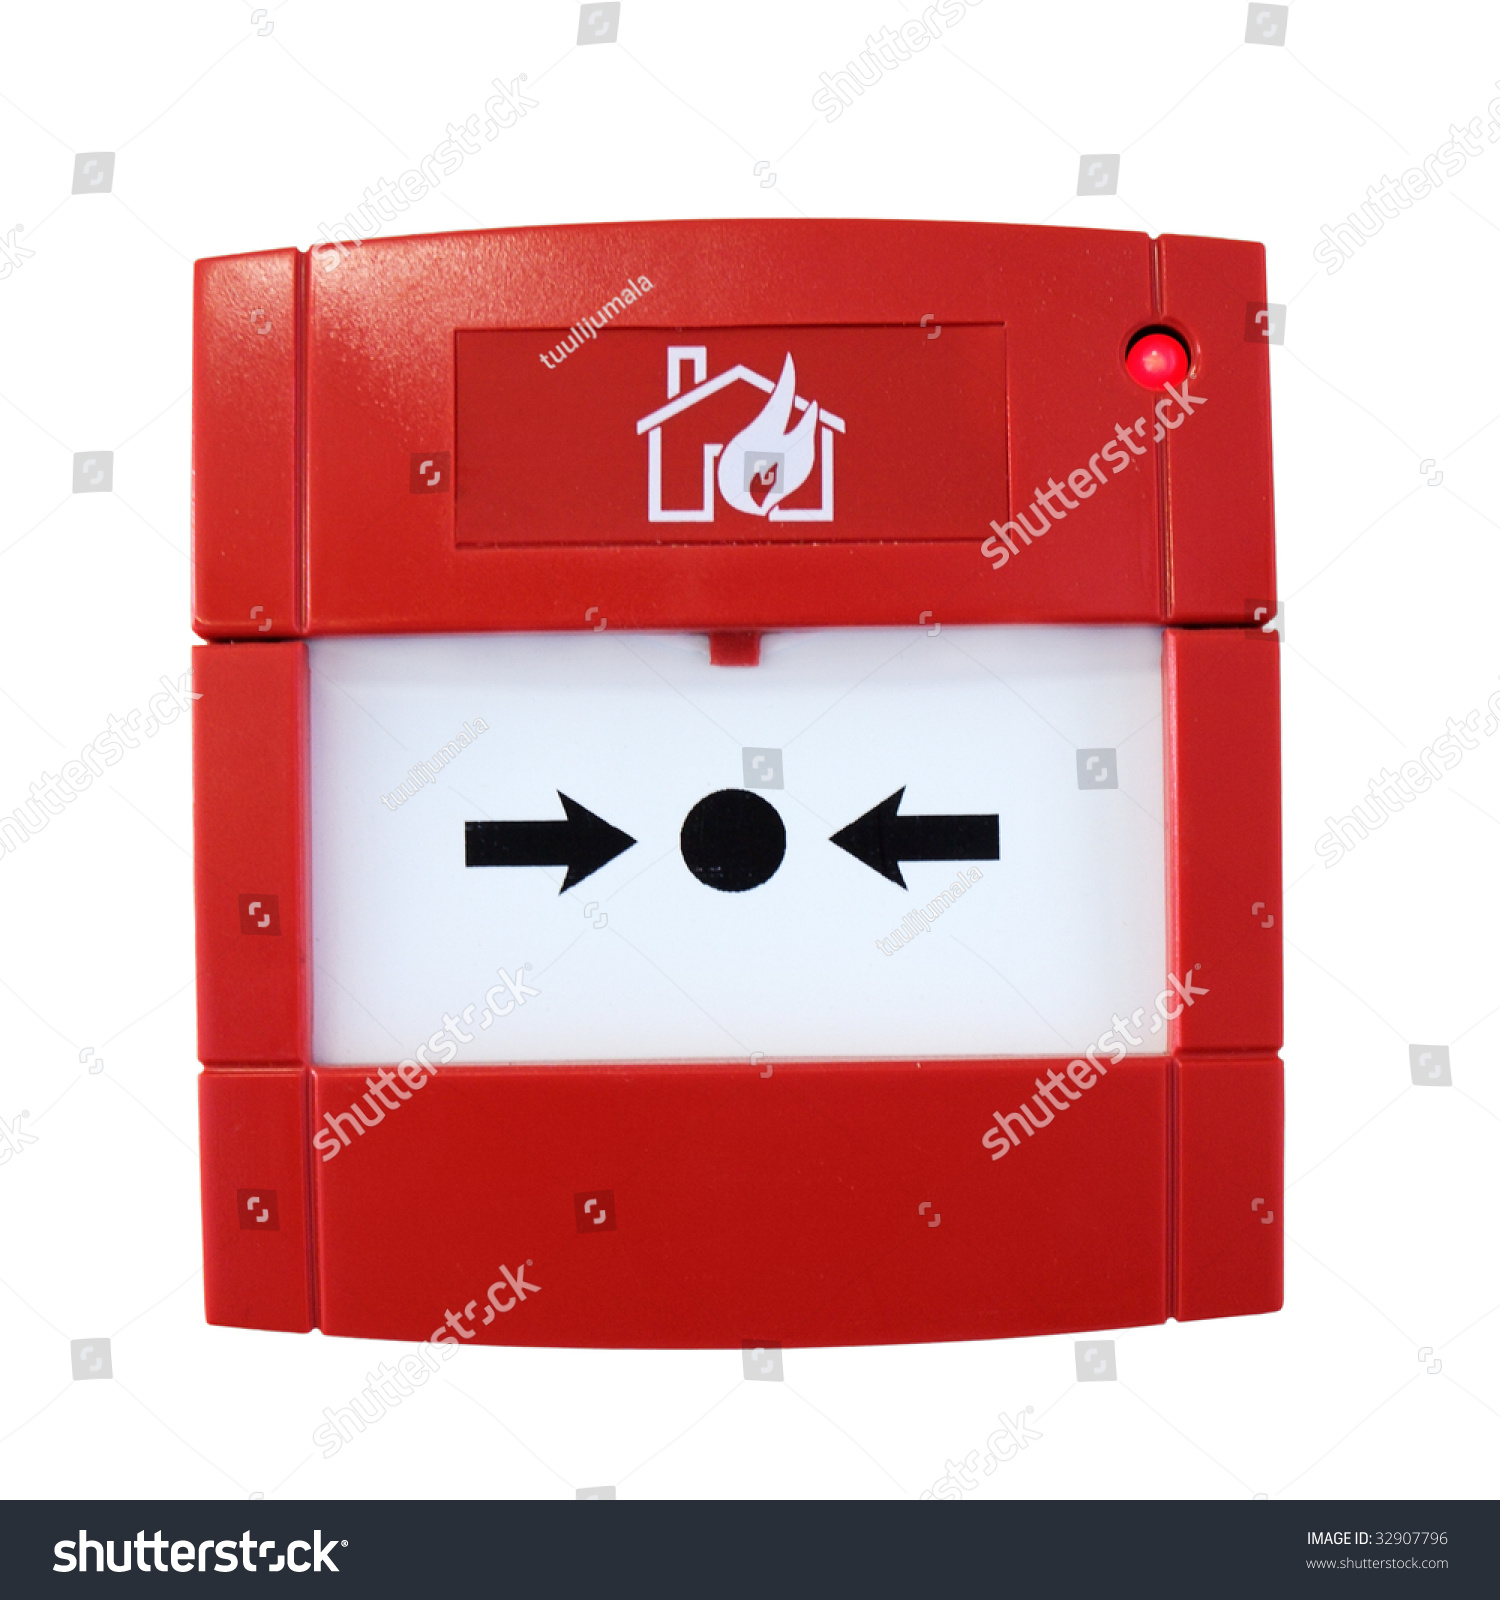 Wall-Mounted Fire Alarm Isolated On White Background Stock Photo ...